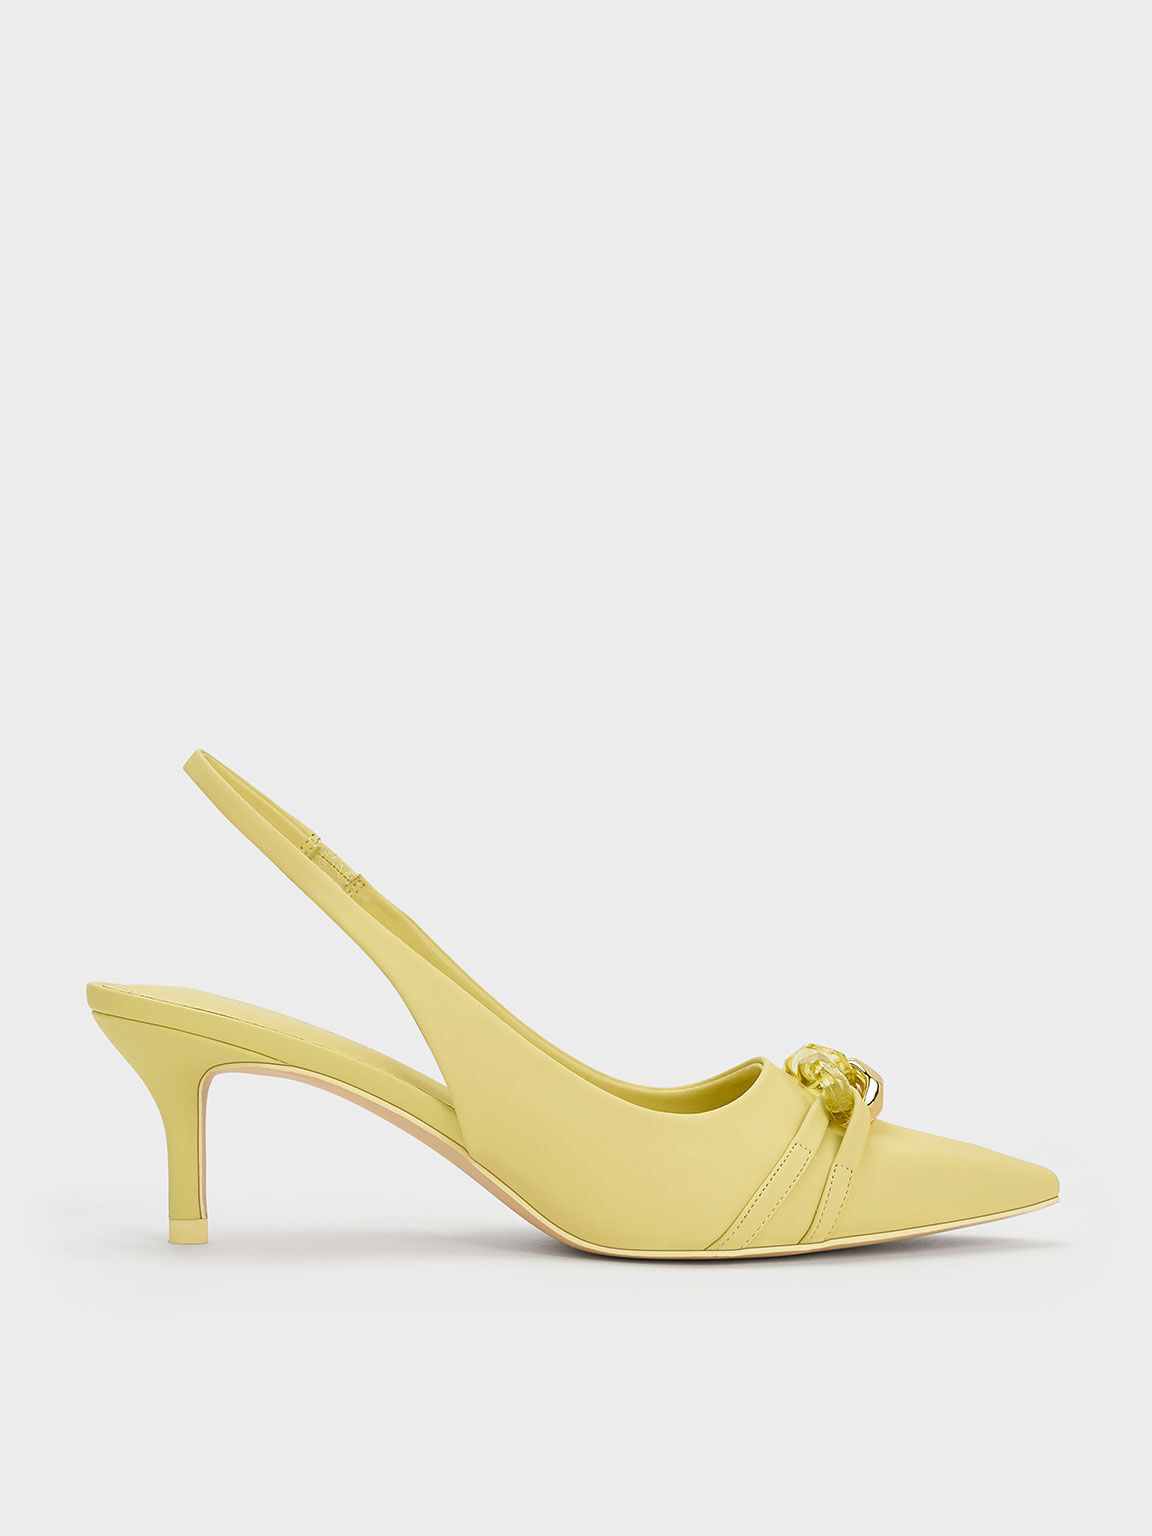 Chain-Link Accent Slingback Pumps, Yellow, hi-res